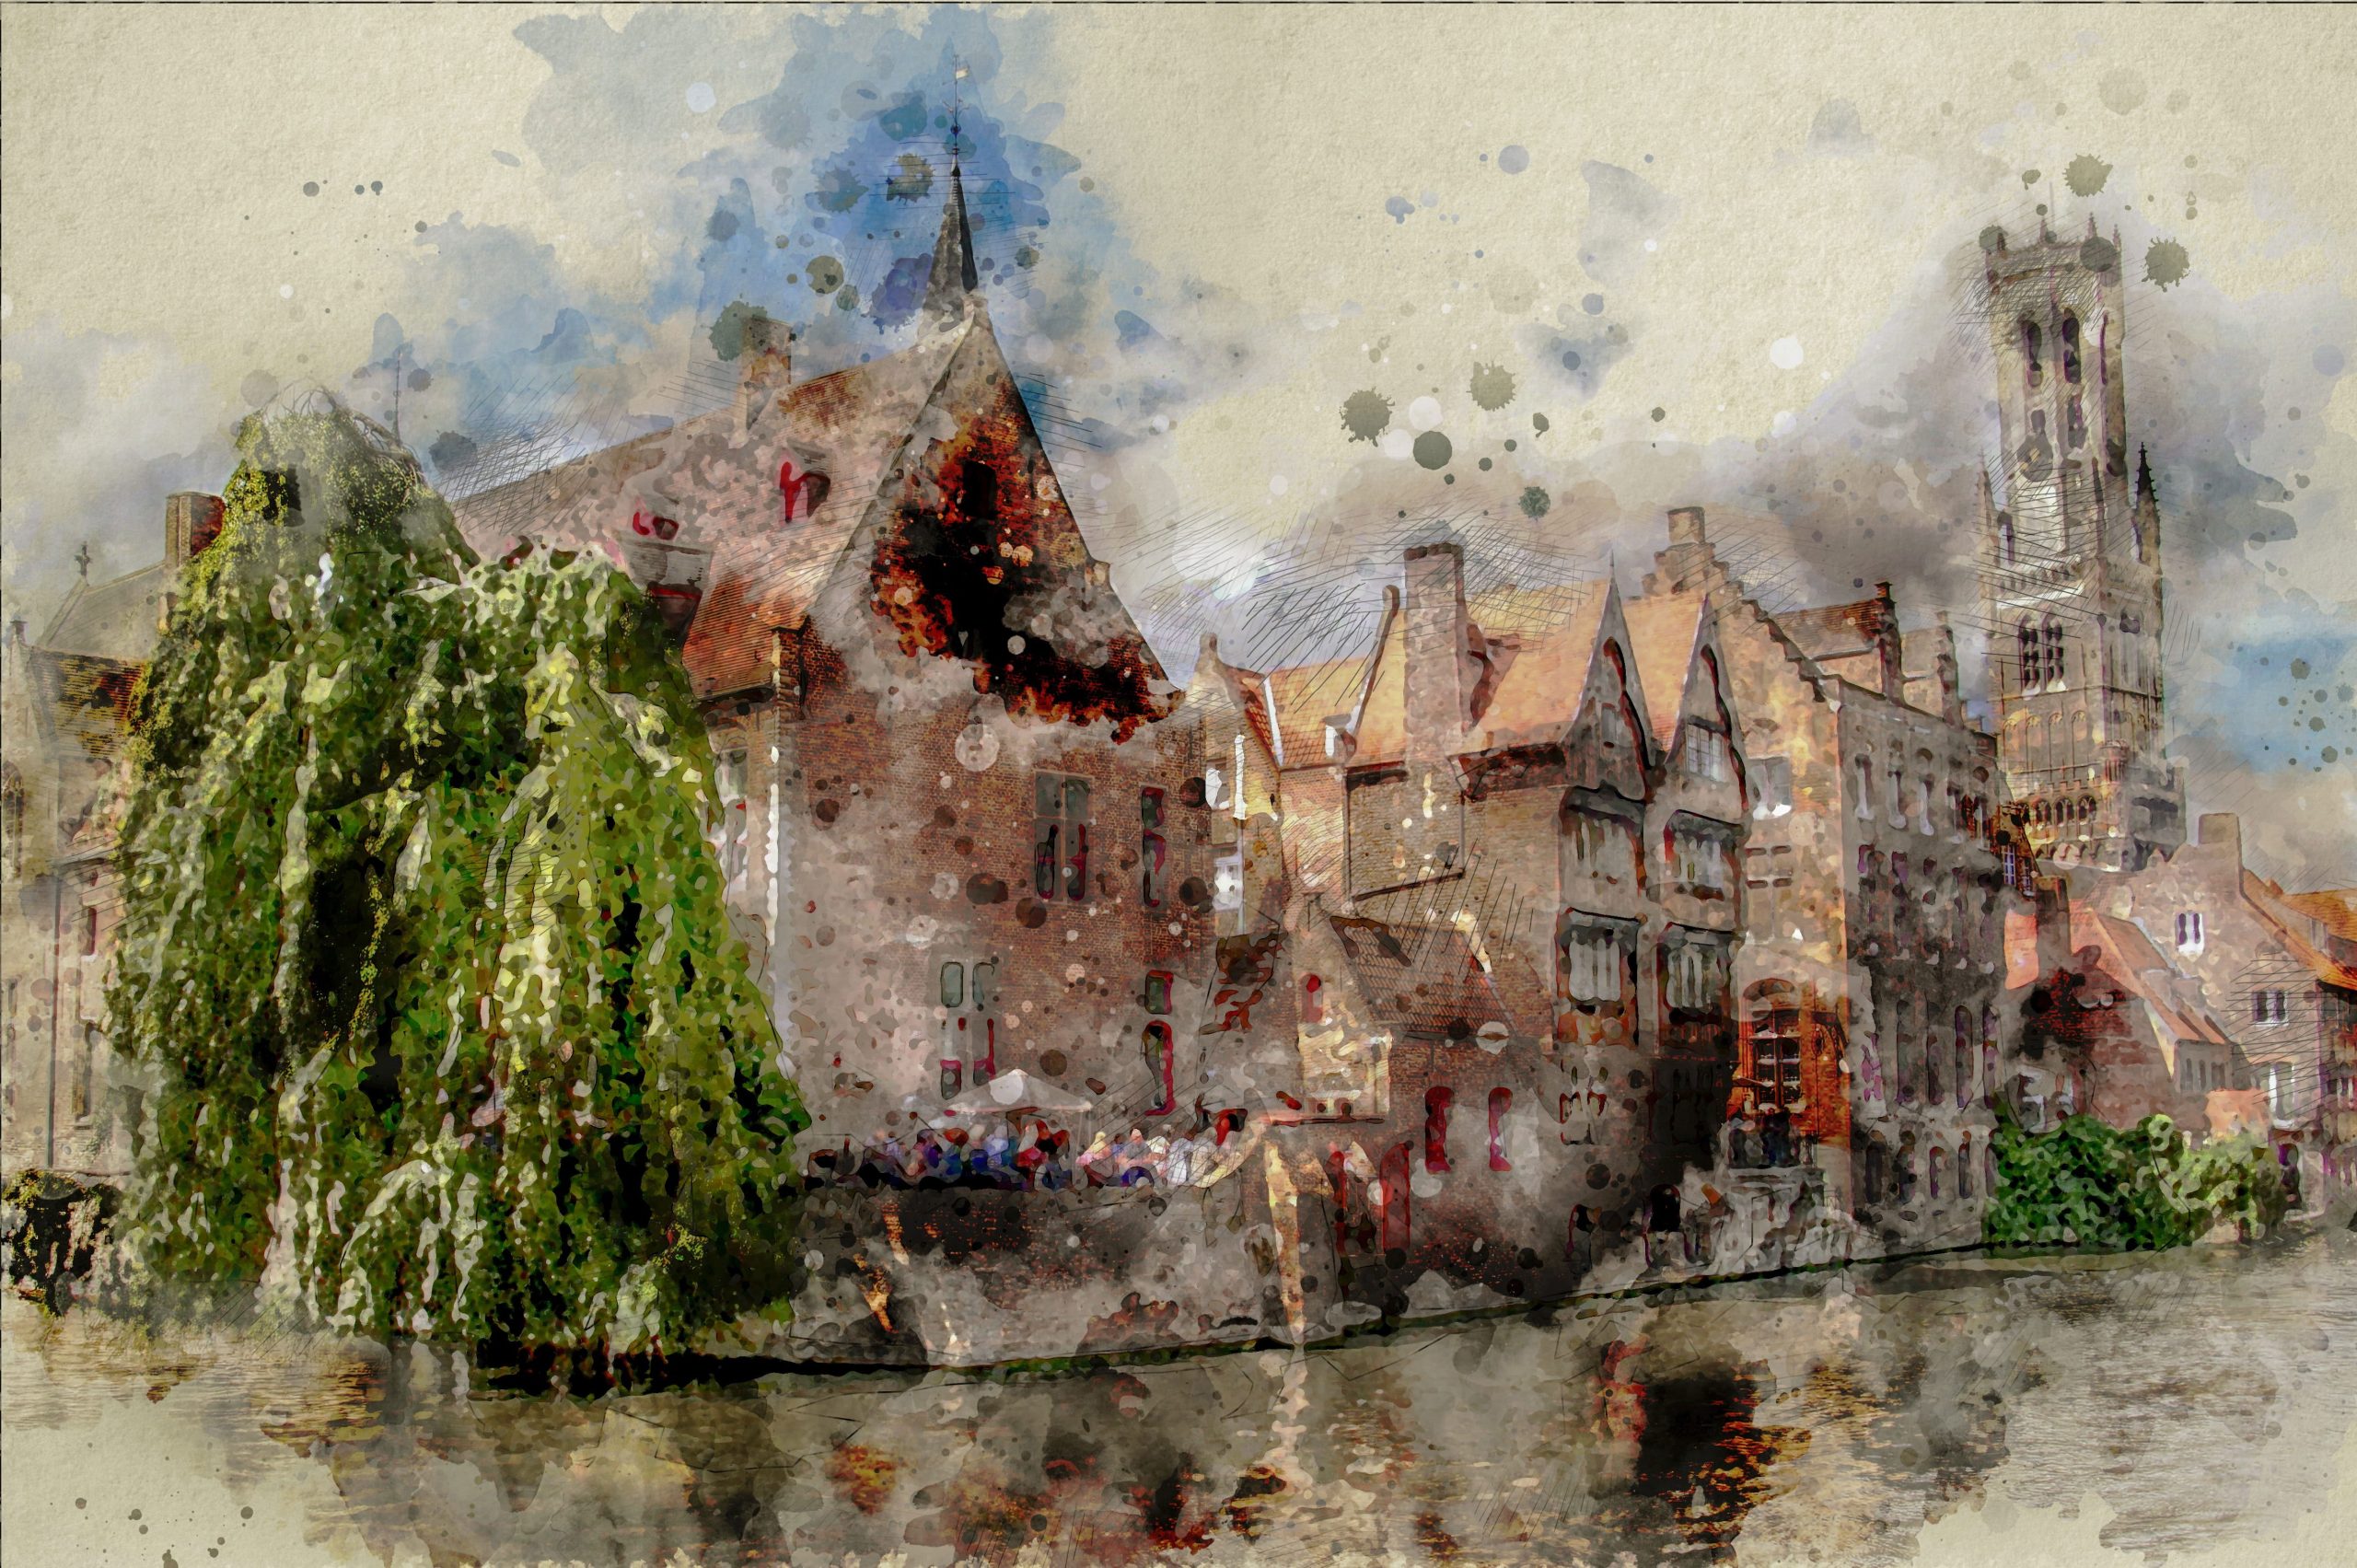 Closeup photo of brown house near body of water painting wallpaper, belfry